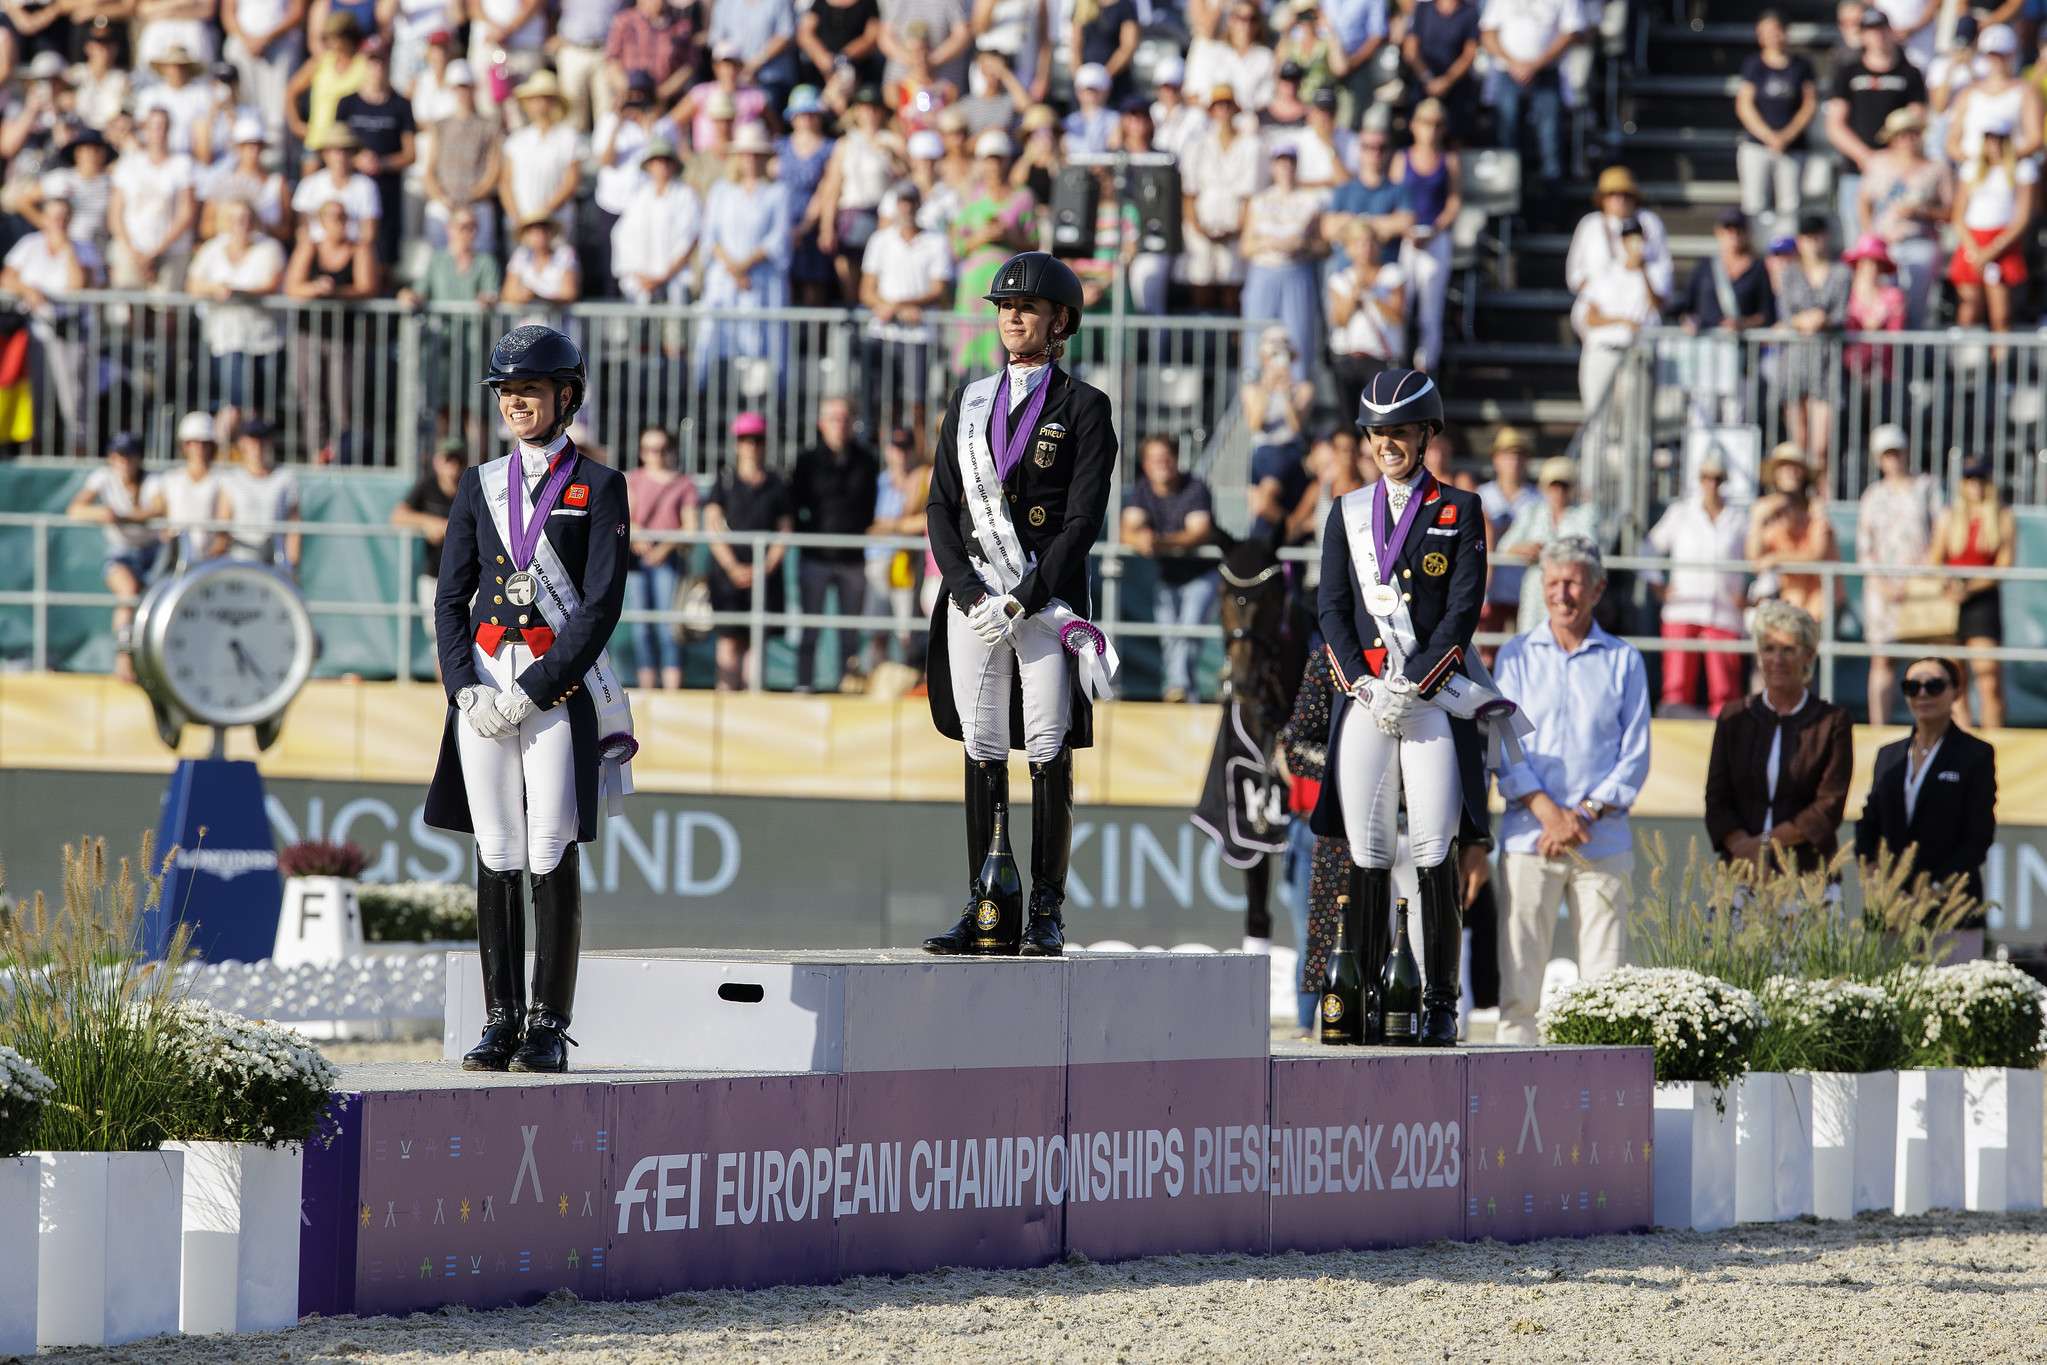 Germany and Britain Reign Supreme in Dressage Freestyle